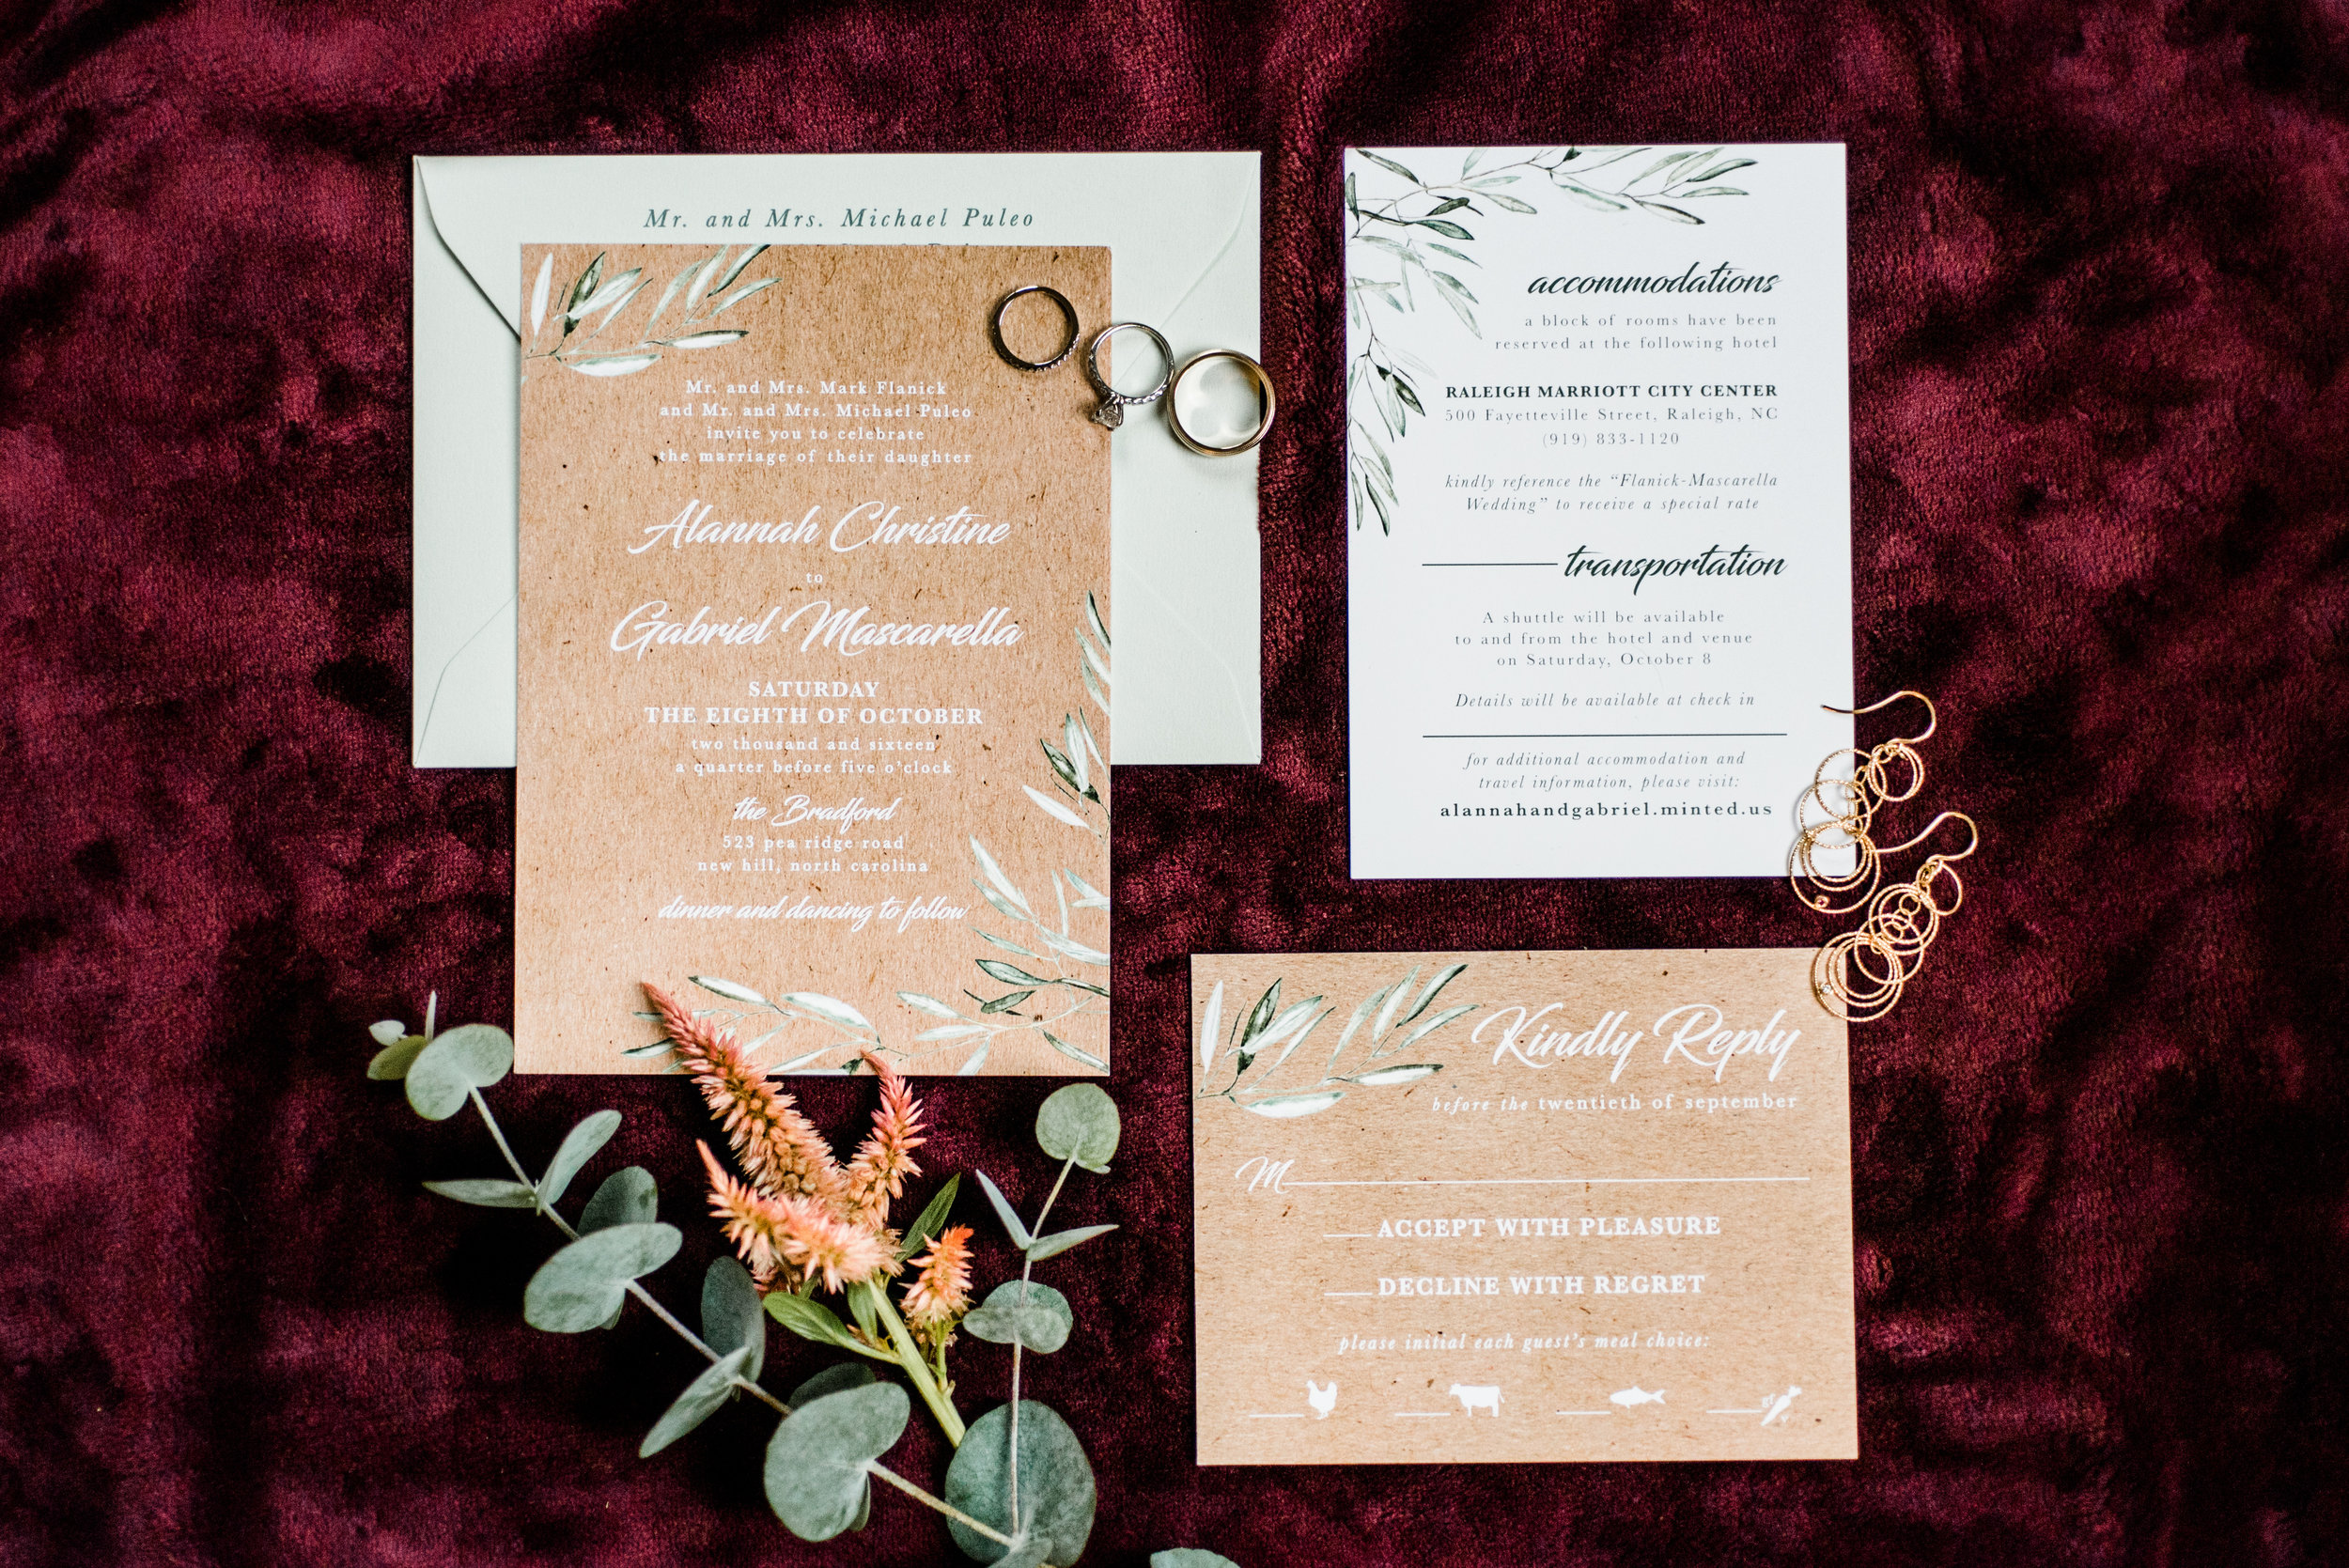  I loved their simple invitation design. It reflected the event so well. 